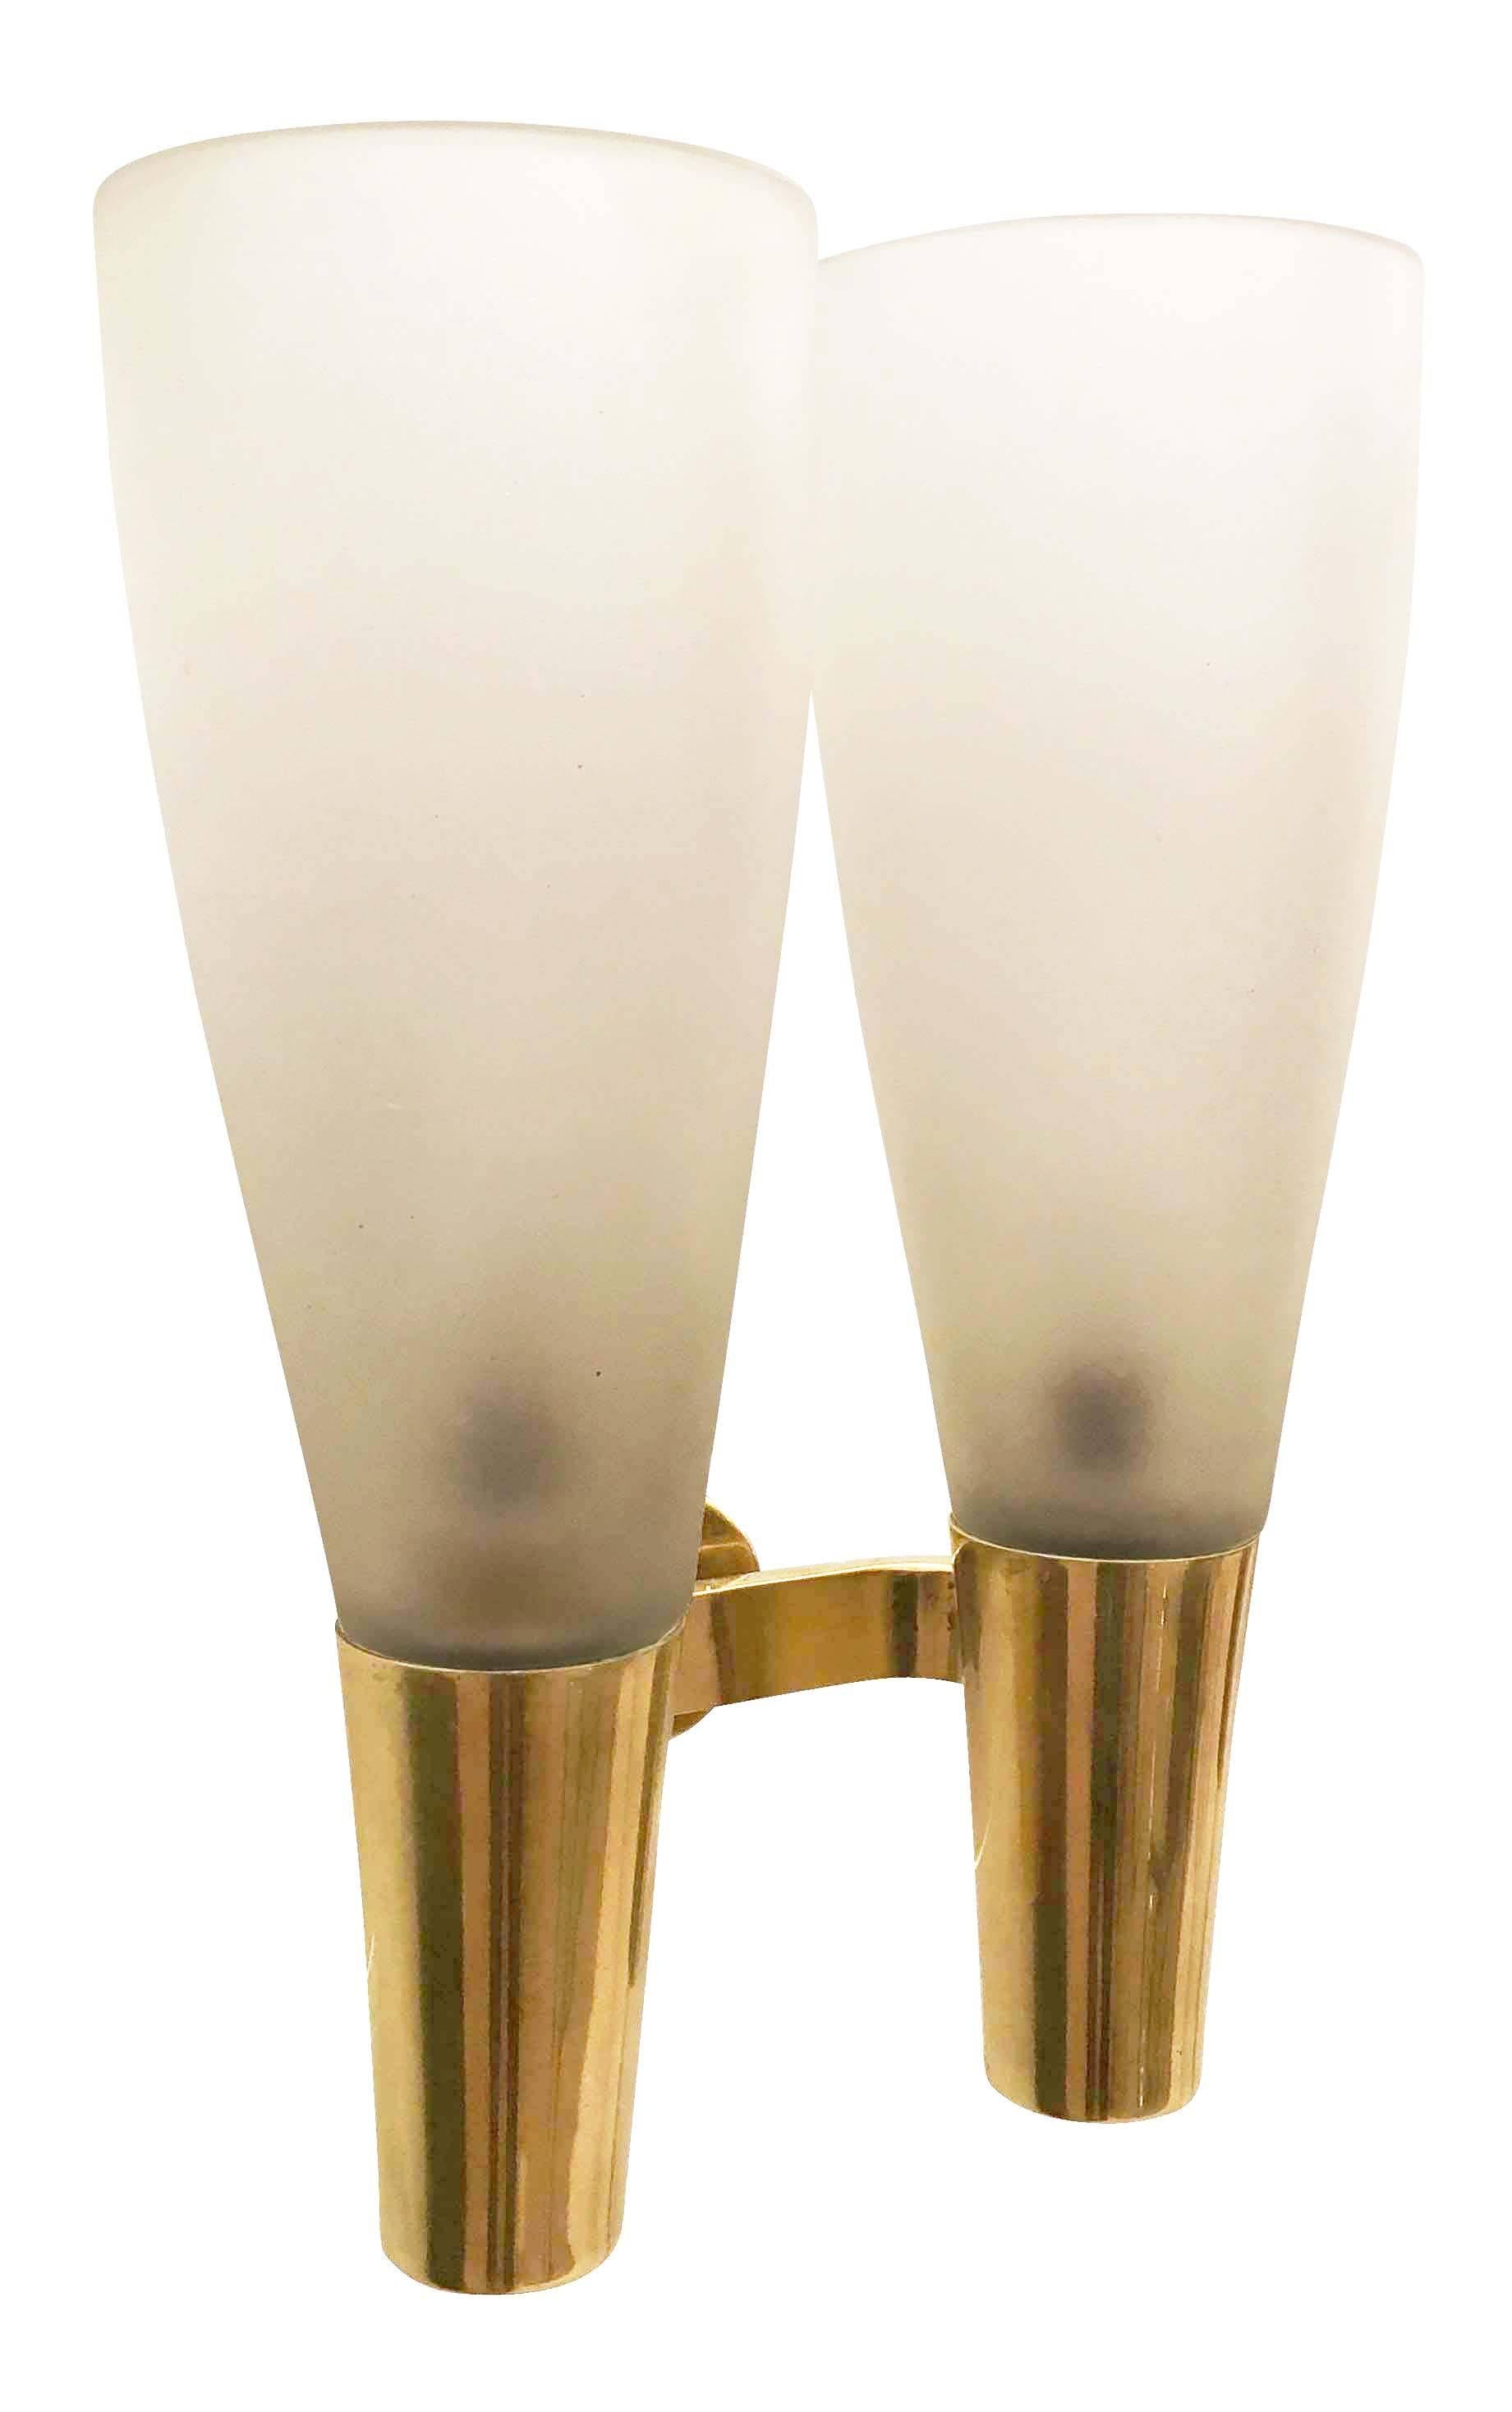 Pair of elegant sconces designed by Pietro Chiesa for Fontana Arte in 1936. Each sconce has two satin glass shades on a polished brass frame.
 